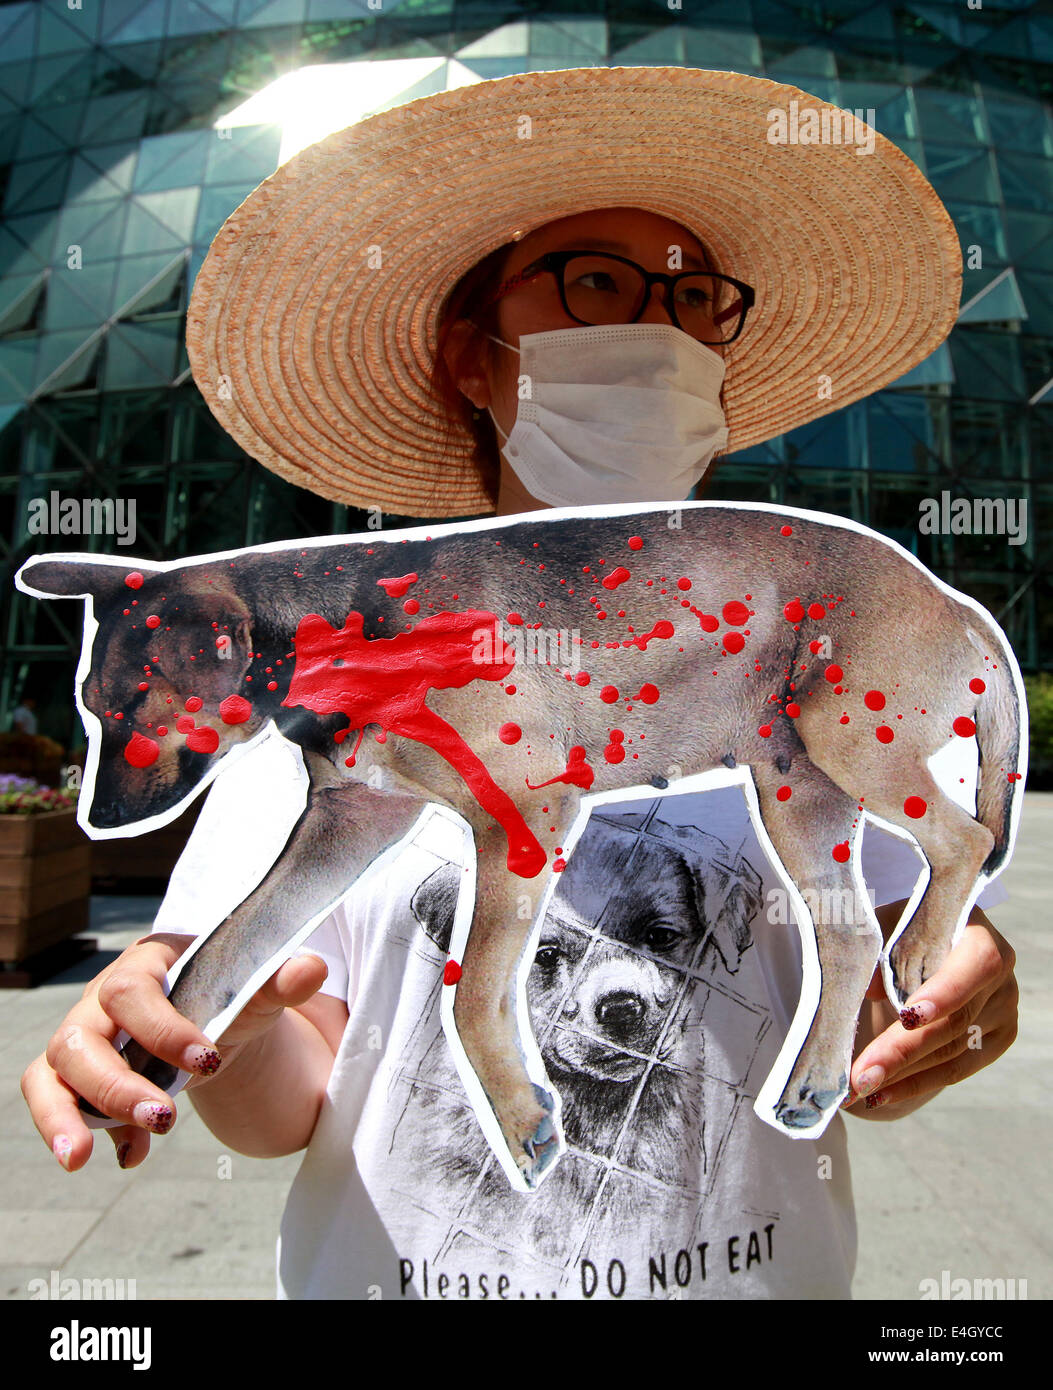 (140711) -- SEOUL, July 11, 2014 (Xinhua) -- An animal rights activist holds a placard during a protest against eating dog meat in front of the city hall of Seoul, South Korea, July 11, 2014. (Xinhua/Park Jin-hee) Stock Photo